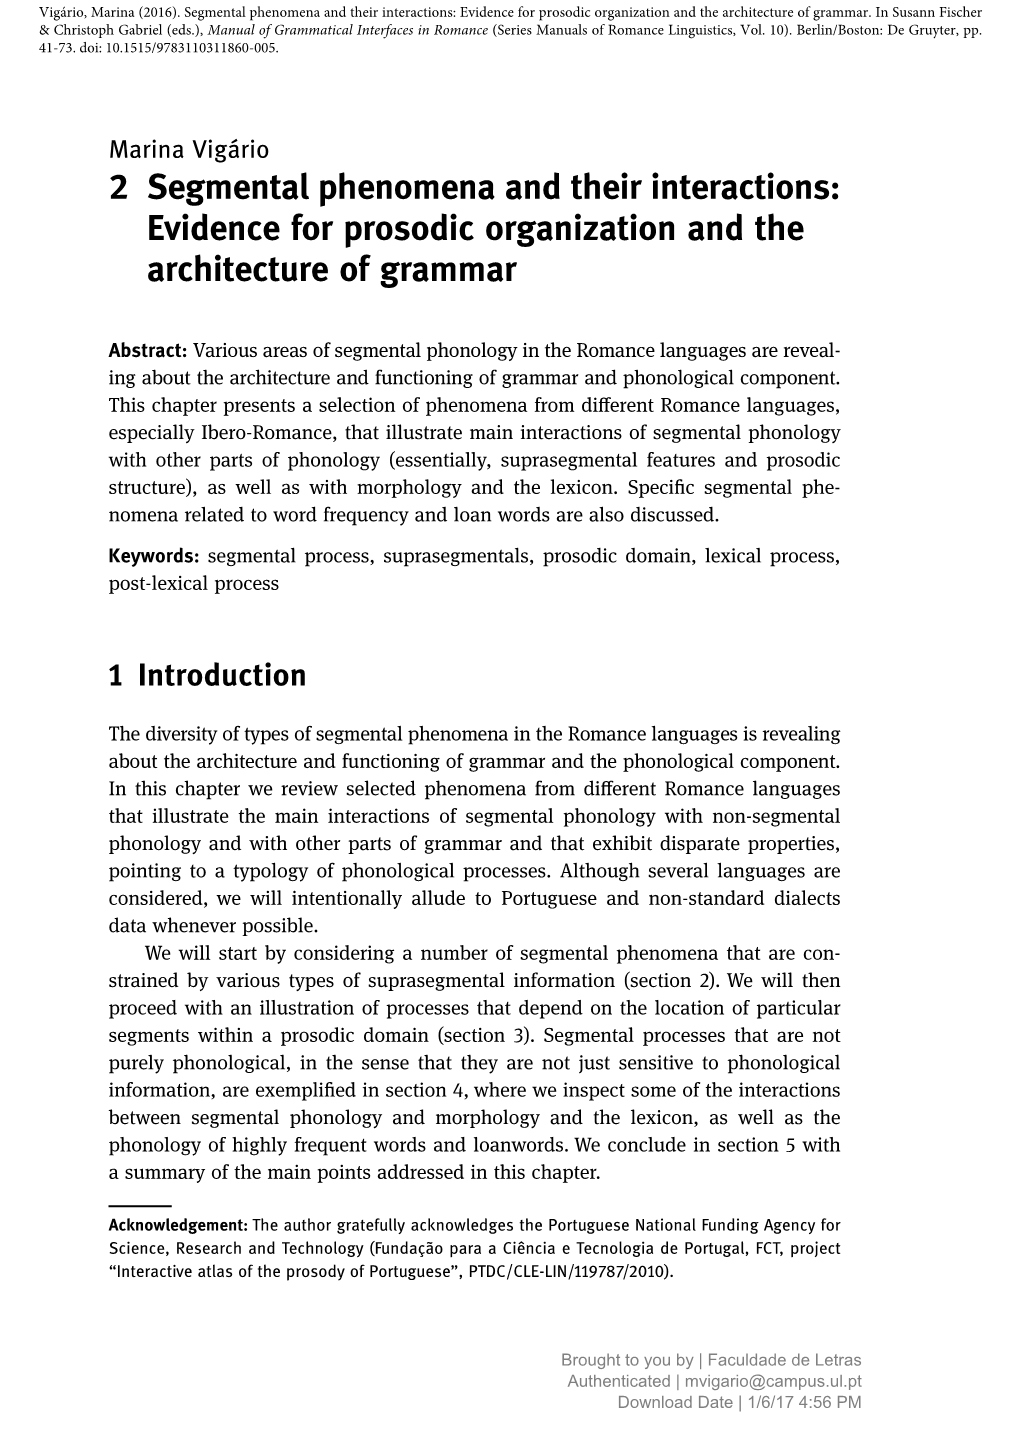 2 Segmental Phenomena and Their Interactions: Evidence for Prosodic Organization and the Architecture of Grammar